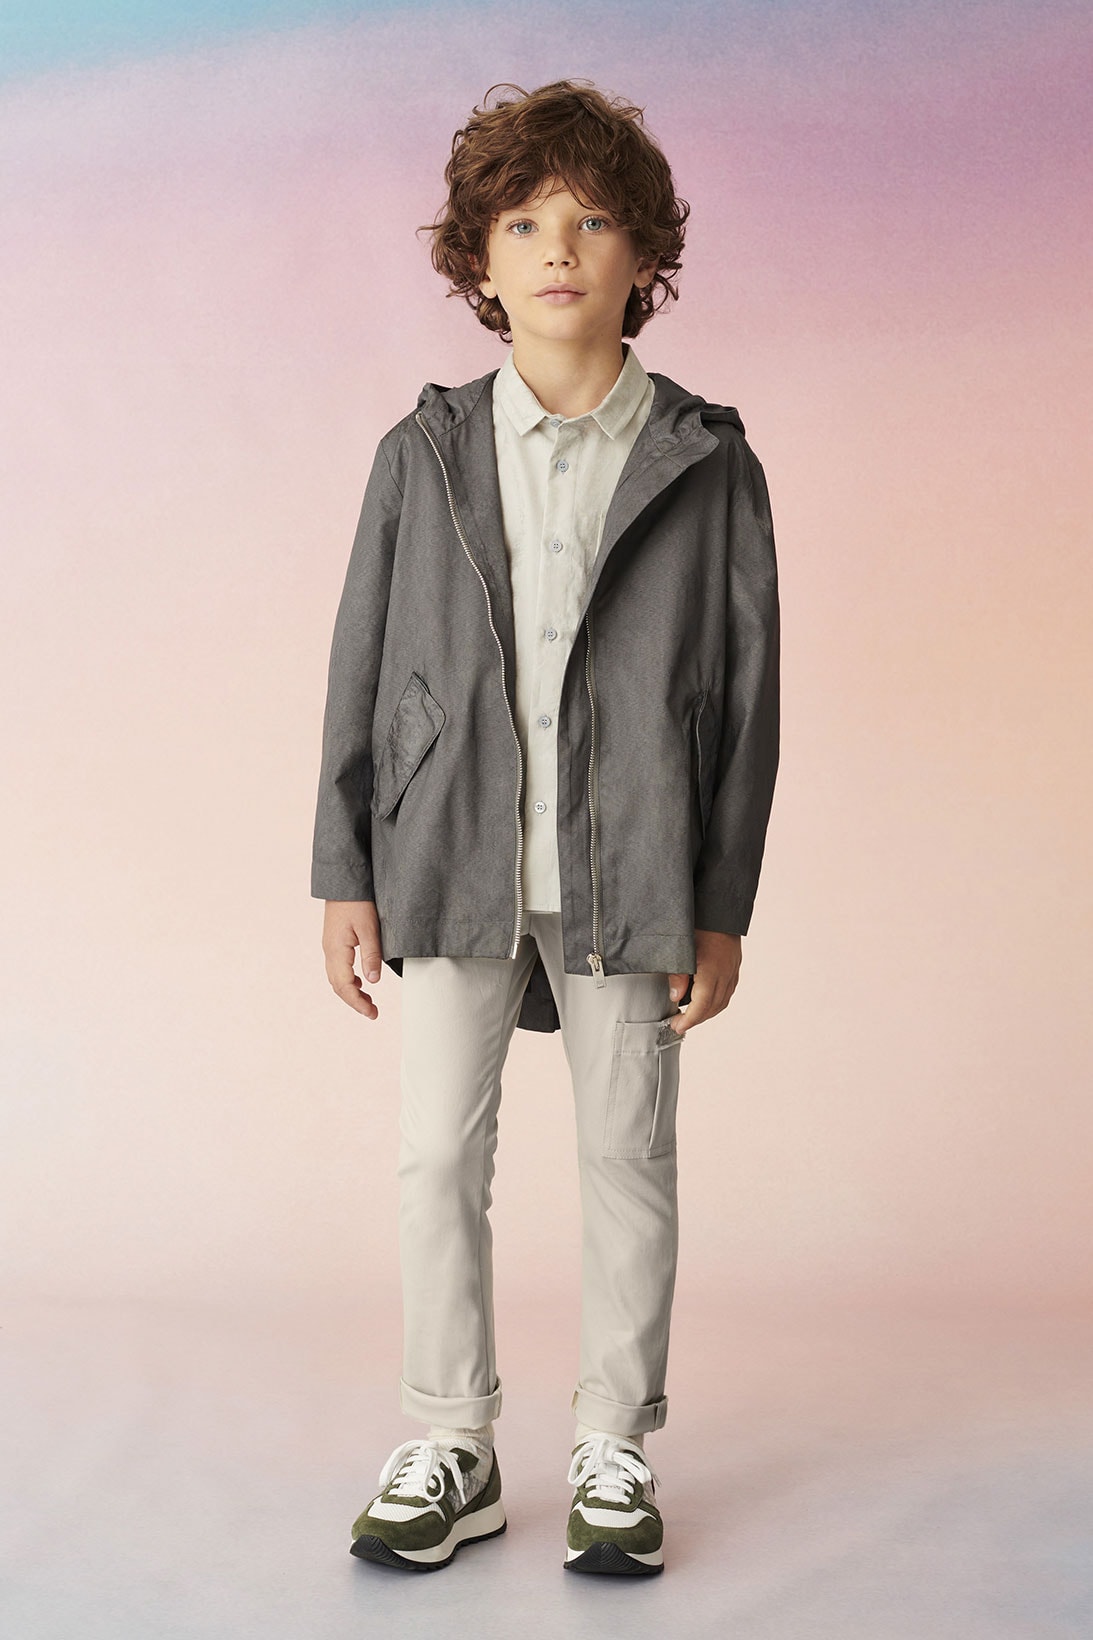 dior spring summer 2021 ss21 kids collection boys jacket